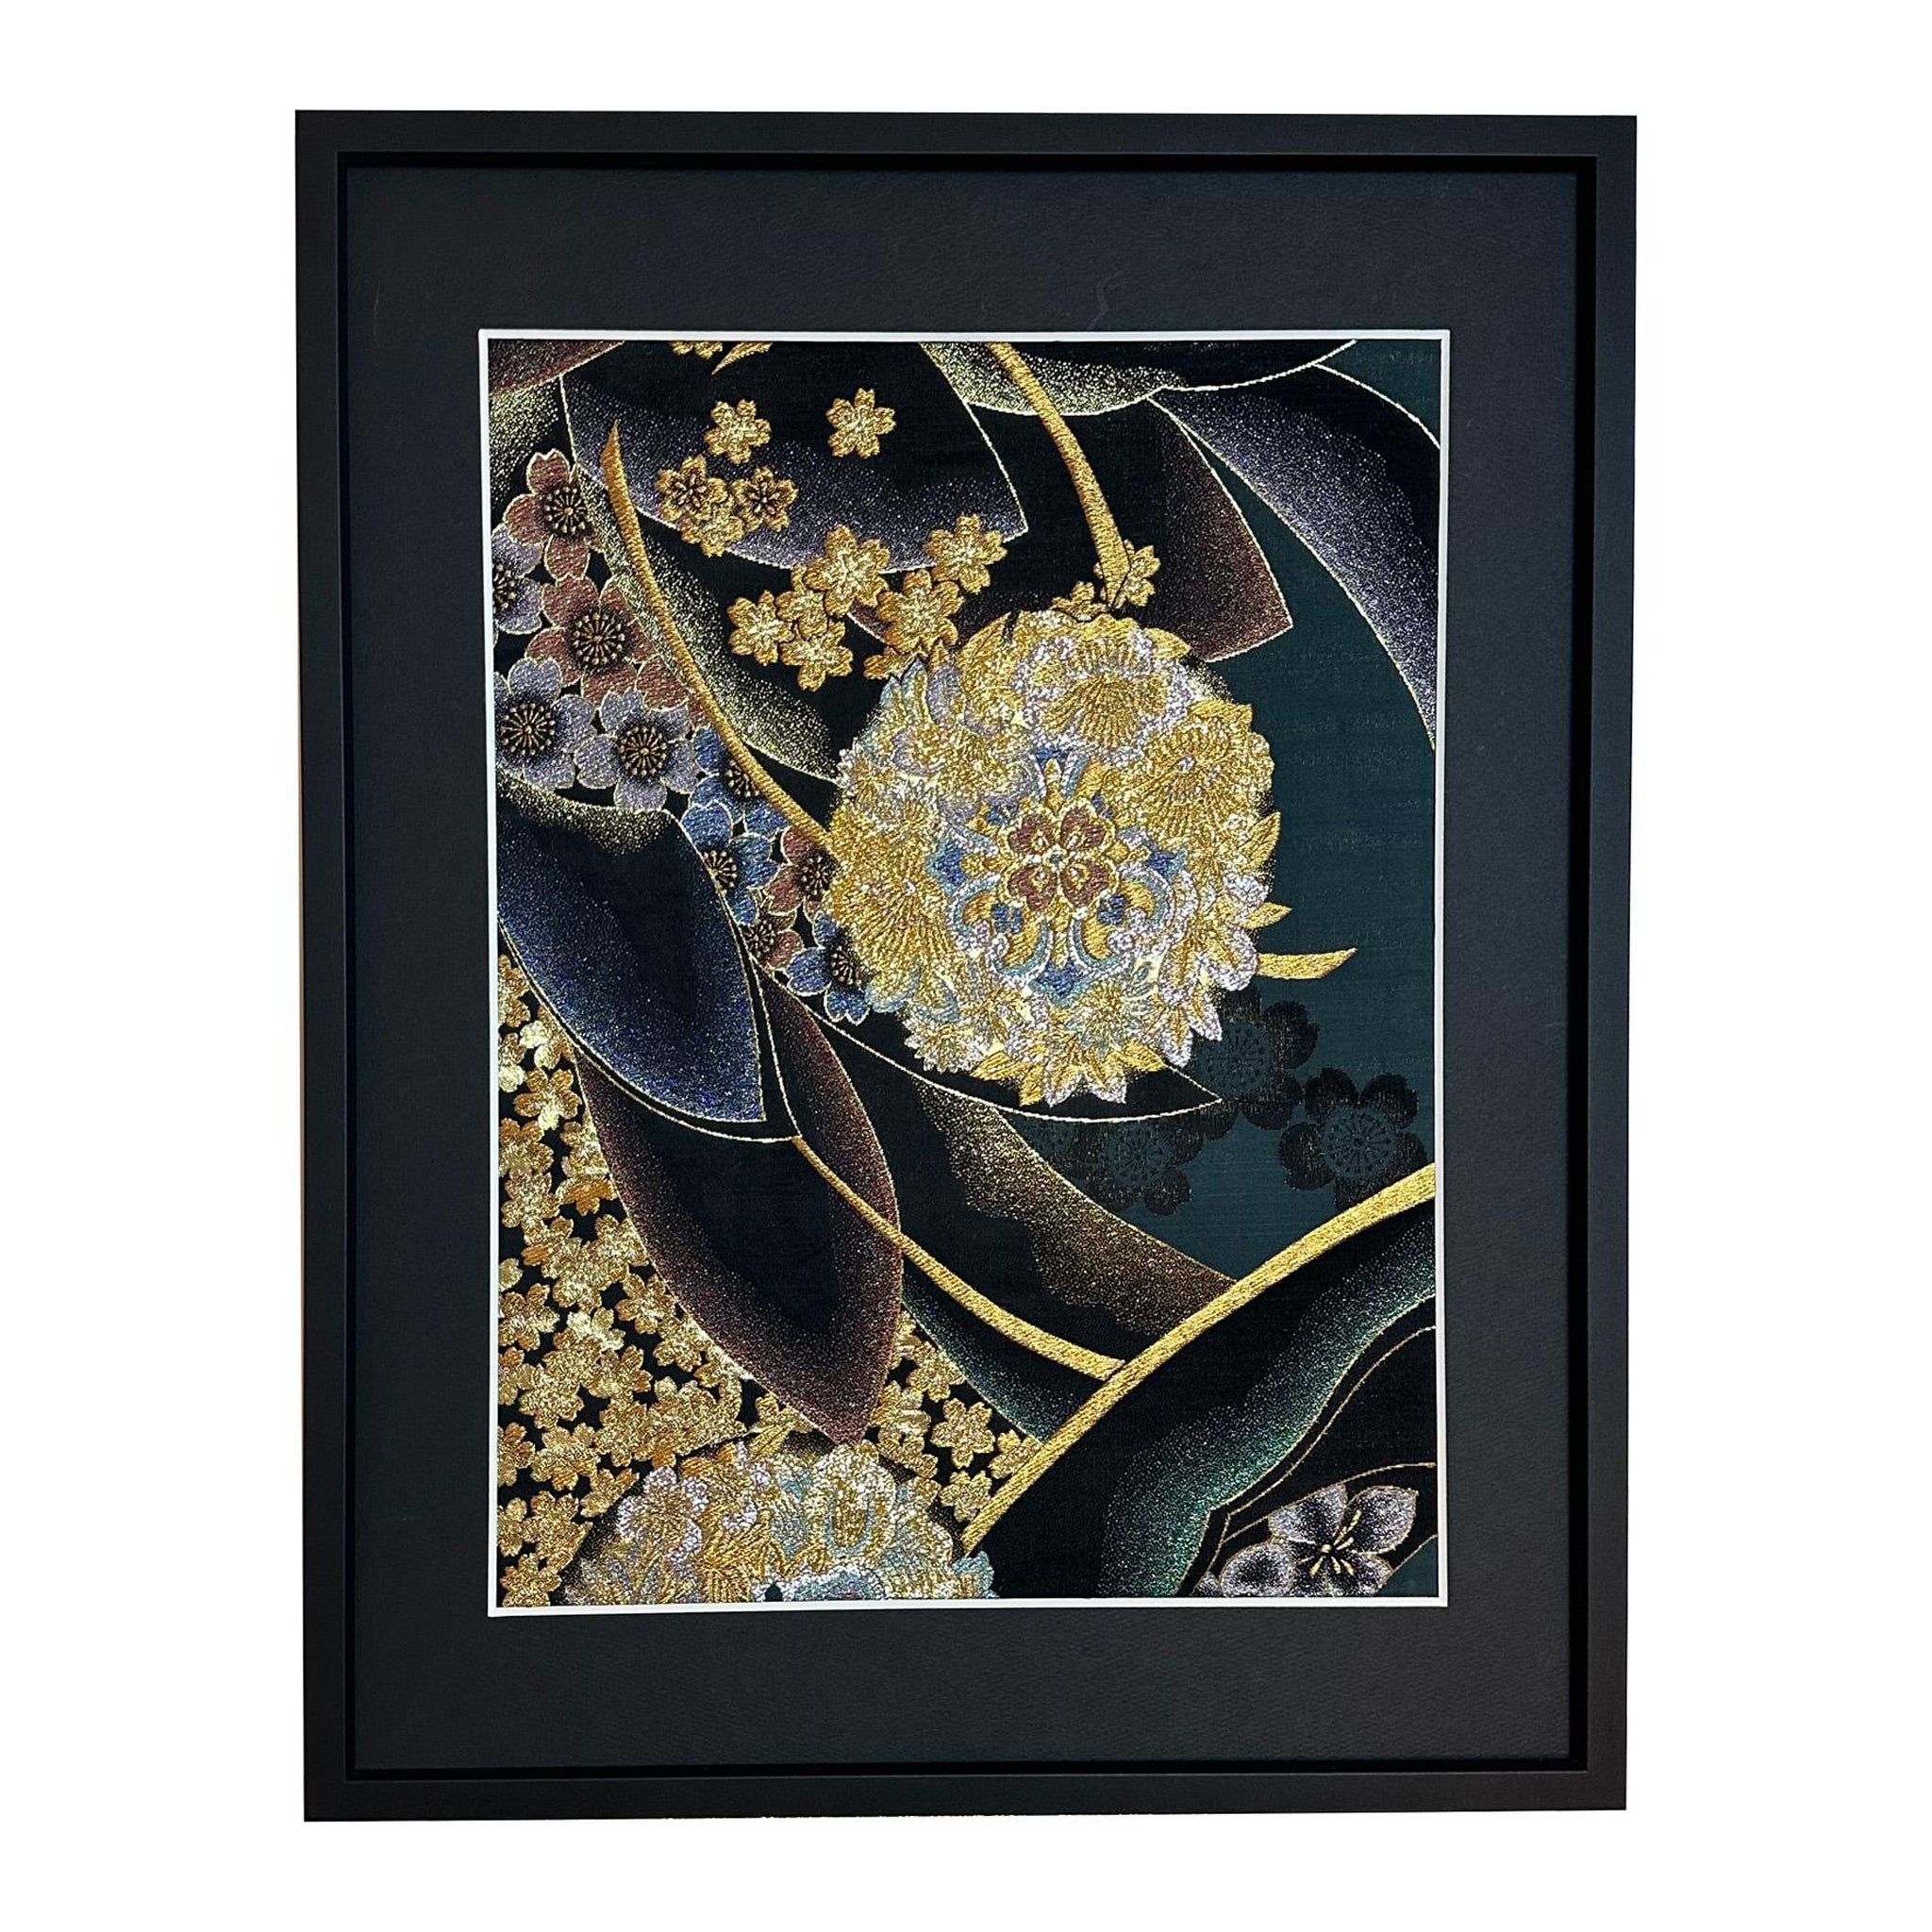 "Bouquet of Love" by Kimono-Couture, Kimono Art / Framed Wall Art / Japanese Art For Sale